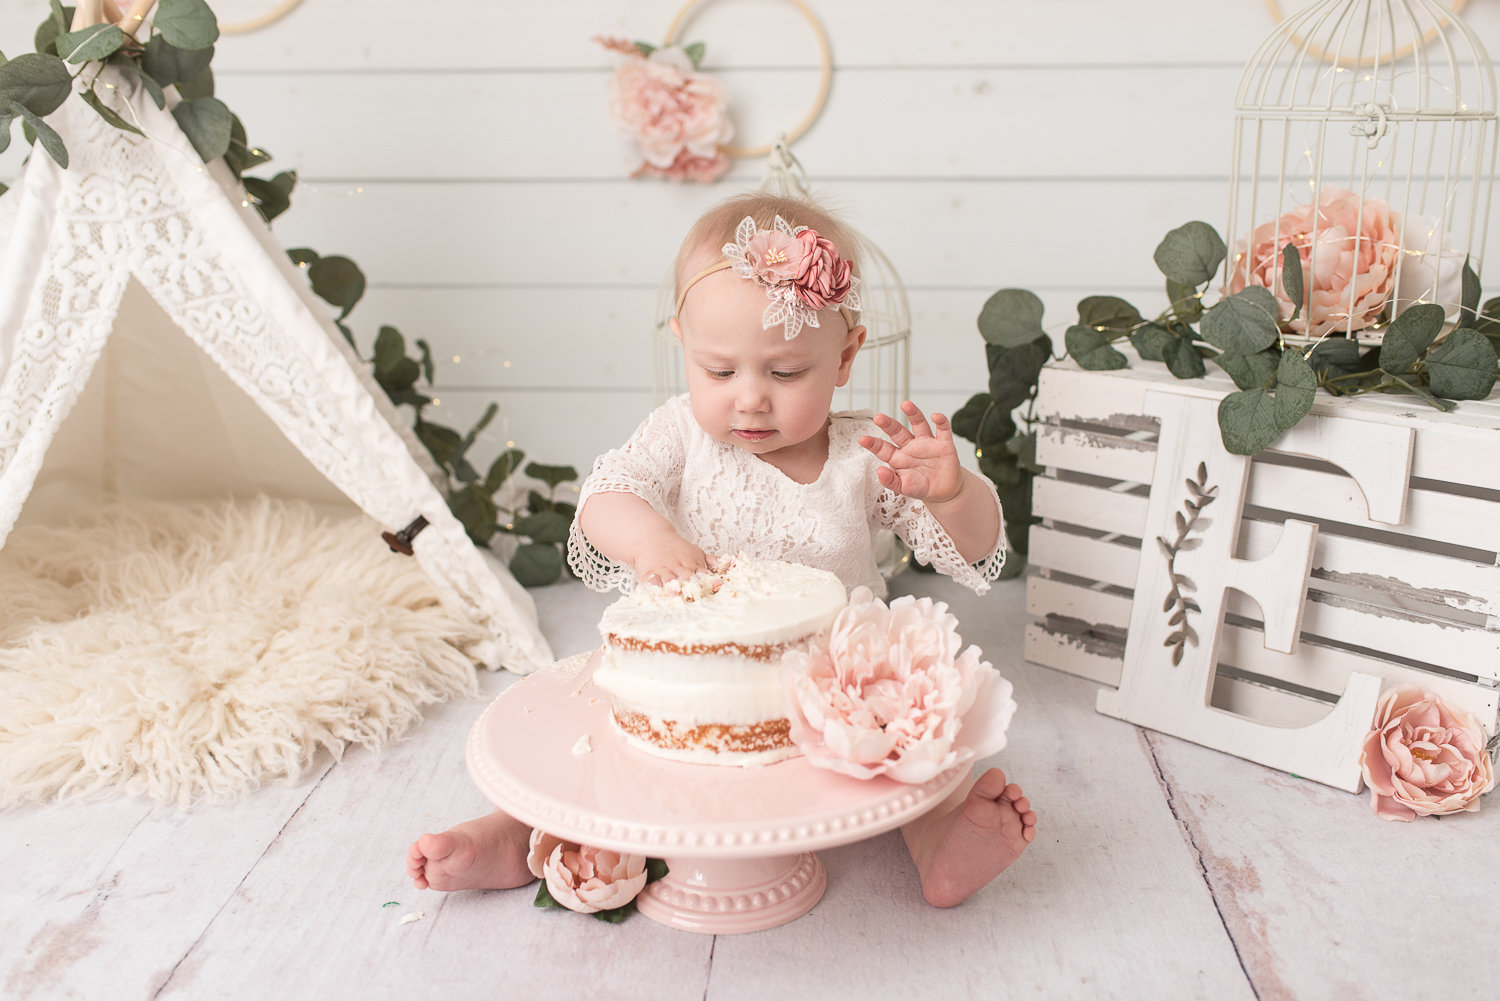 Light and bright cake smash in studio - Canton, CT - Sharon Leger Photography